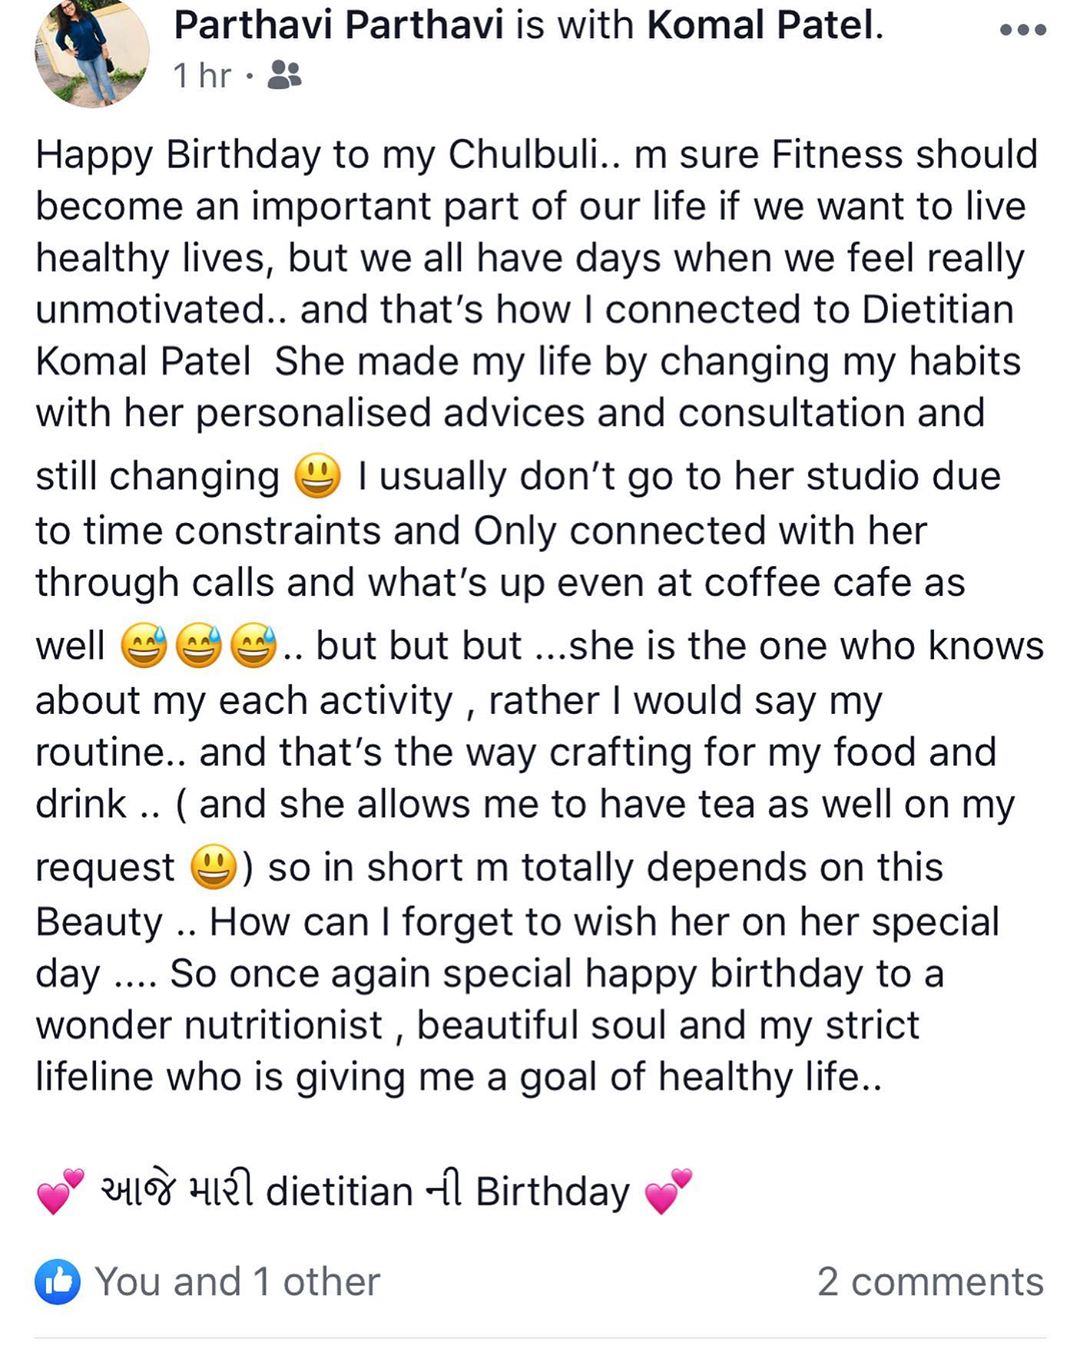 A perfect end to a perfect birthday 
Thank you @parthavi6288  for your kind words means a lot ....
But remember tea only sometimes 😜😜
Loads of love and health tips for your life.. will always be your lifeguard..